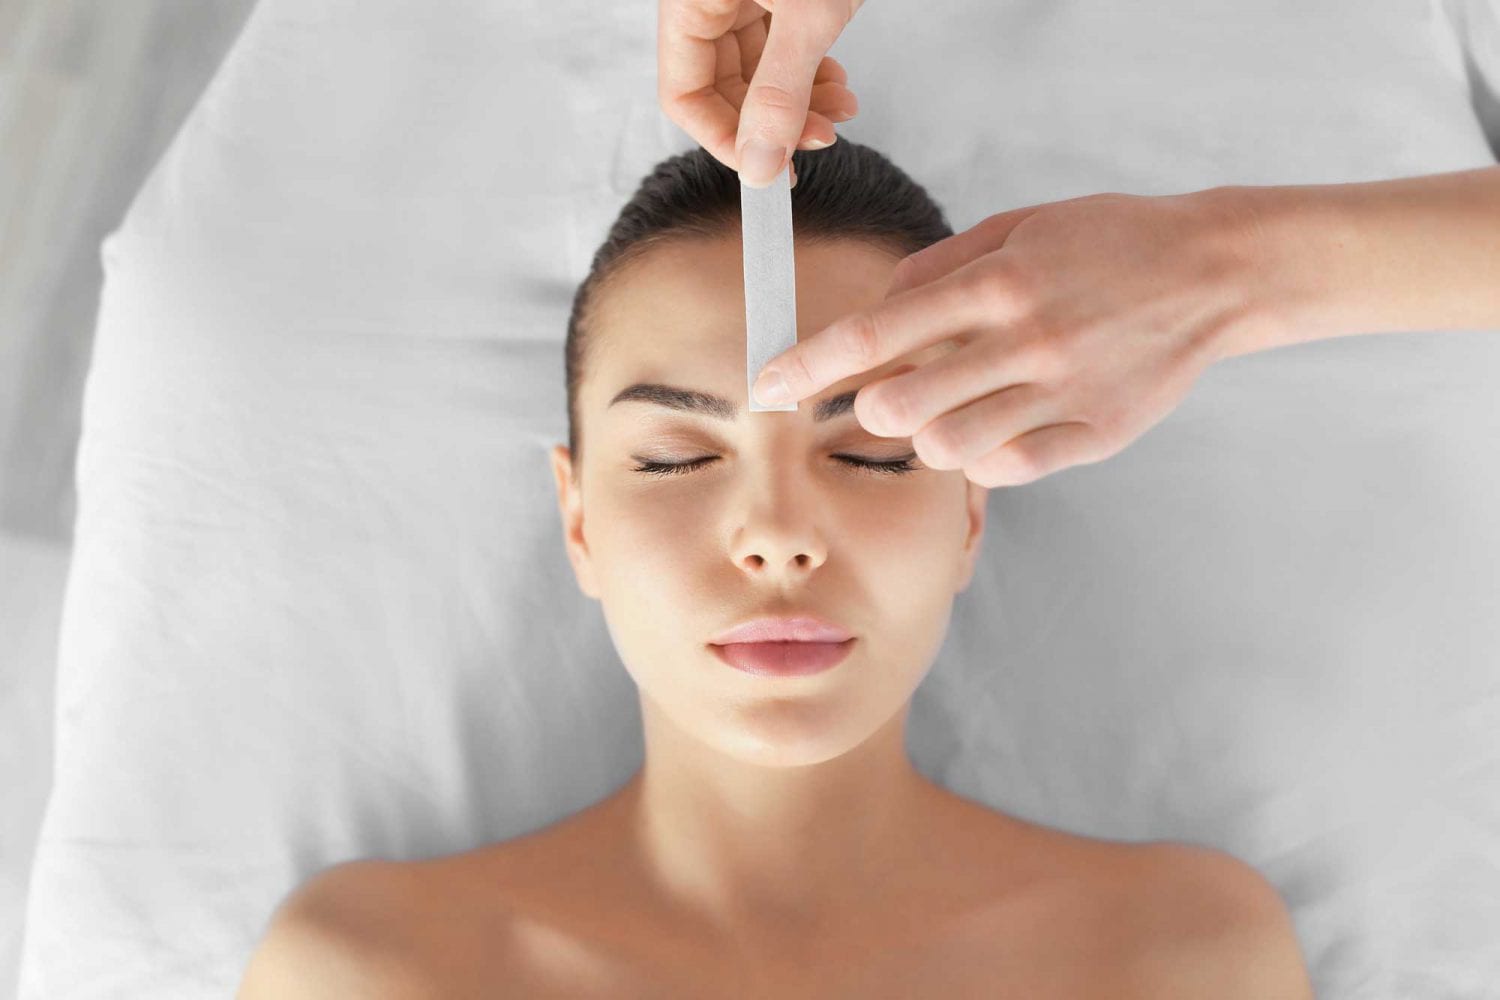 Waxing Skin Care We Offer Facial Aesthetic Services Like Dermaplaning Injectables And